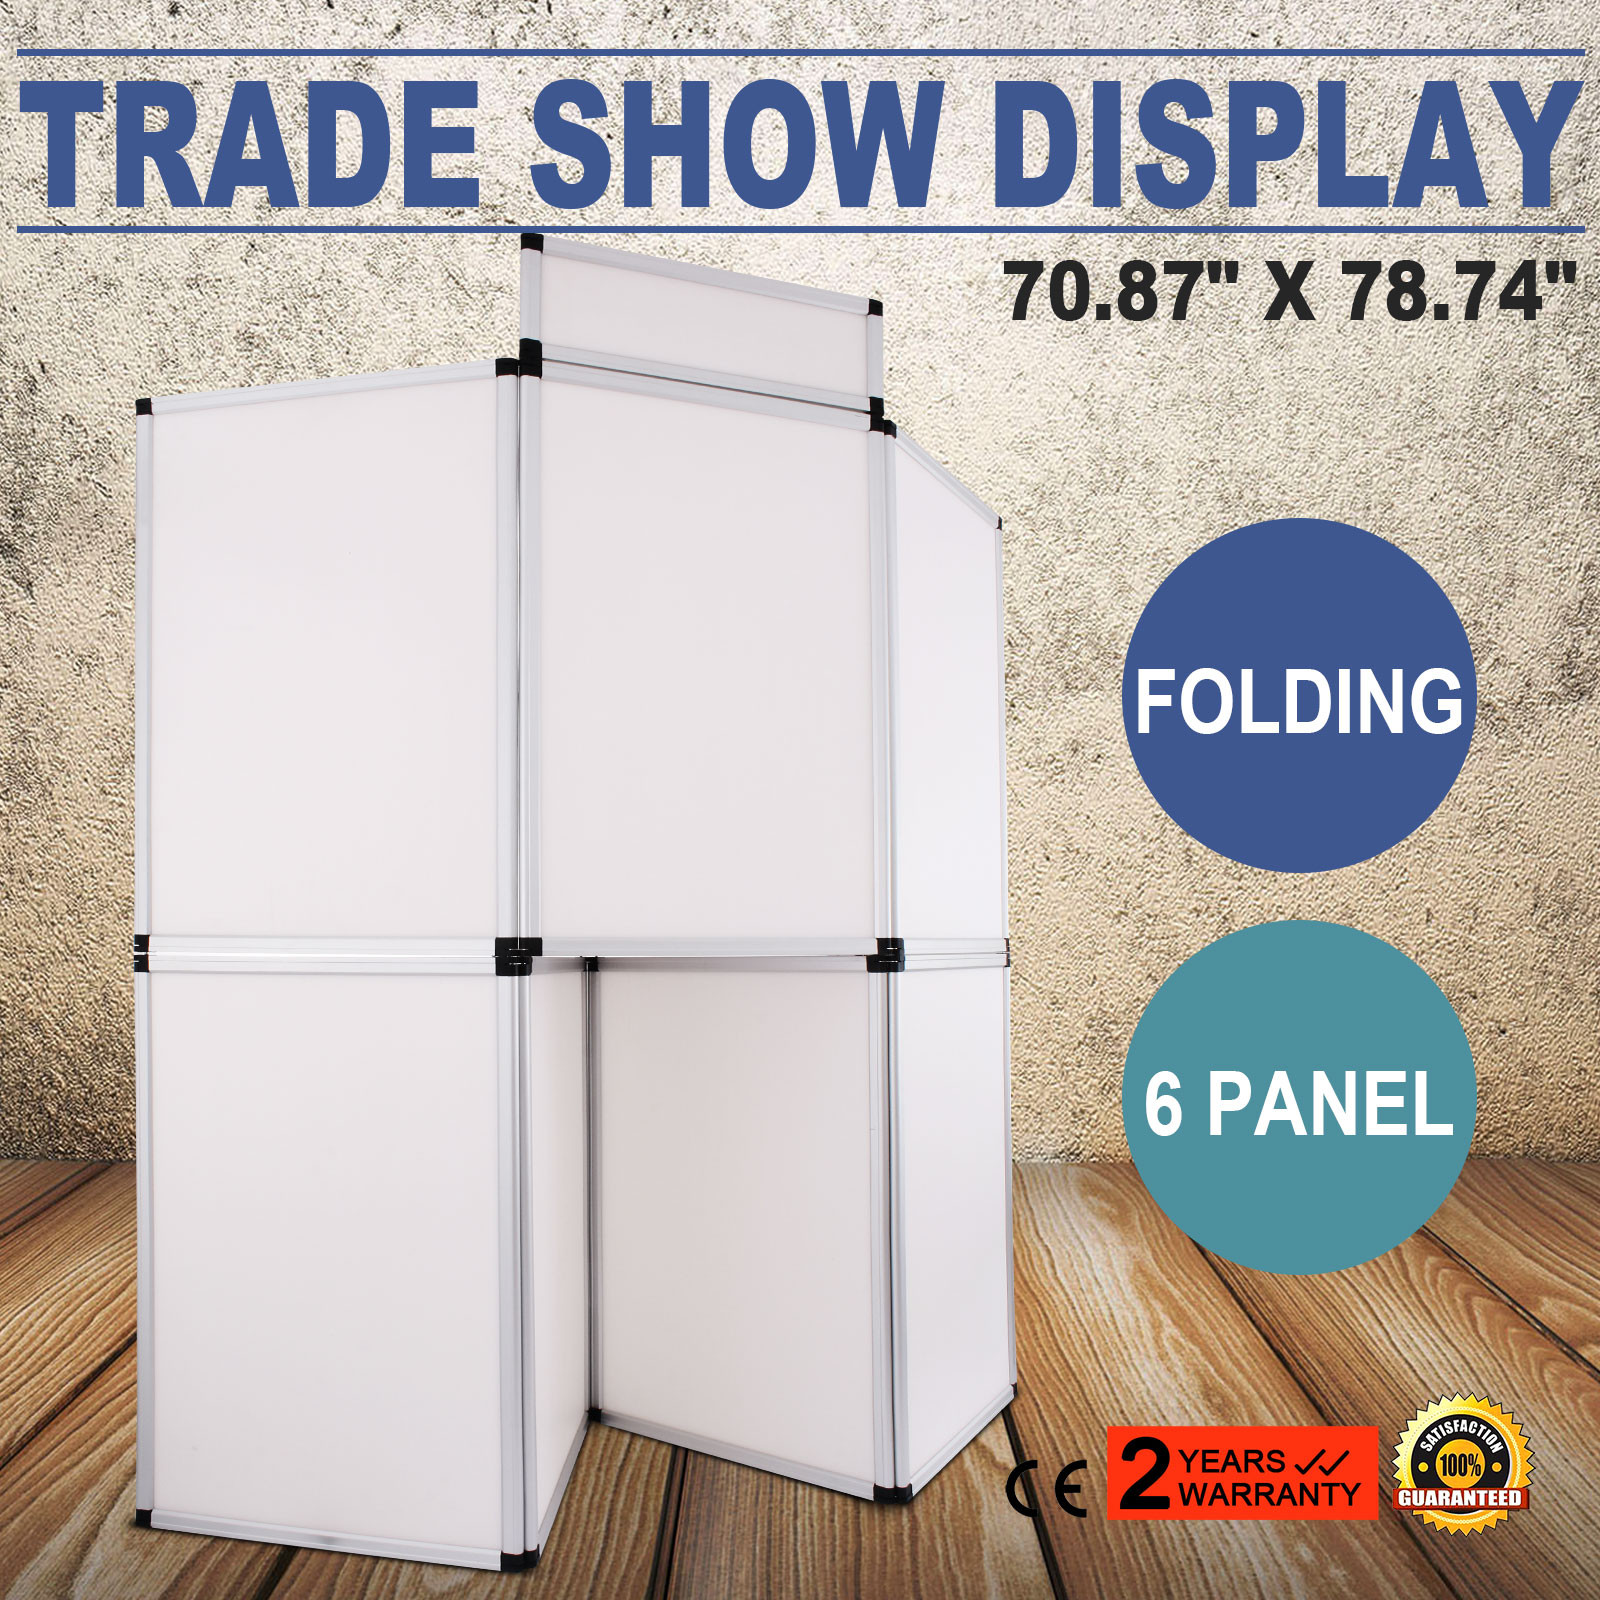 7Panel Exhibition Folding Banner Display Board Aluminum Exhibition Board Stand - Picture 1 of 1